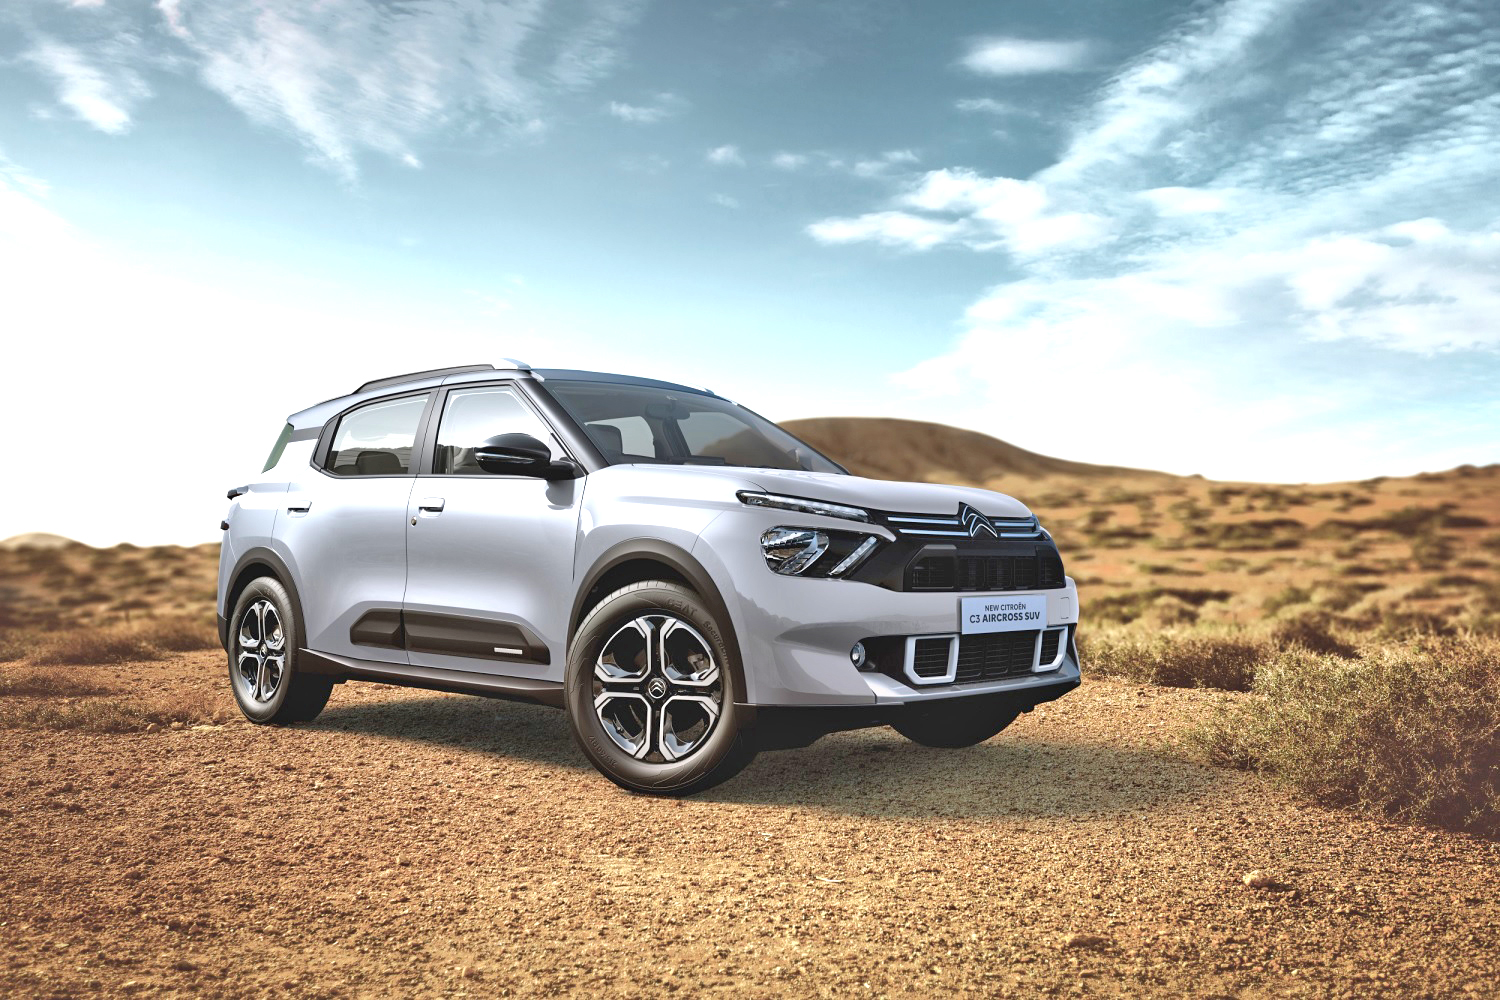 C3 Aircross is French car brand  Citroën’s fourth car in India